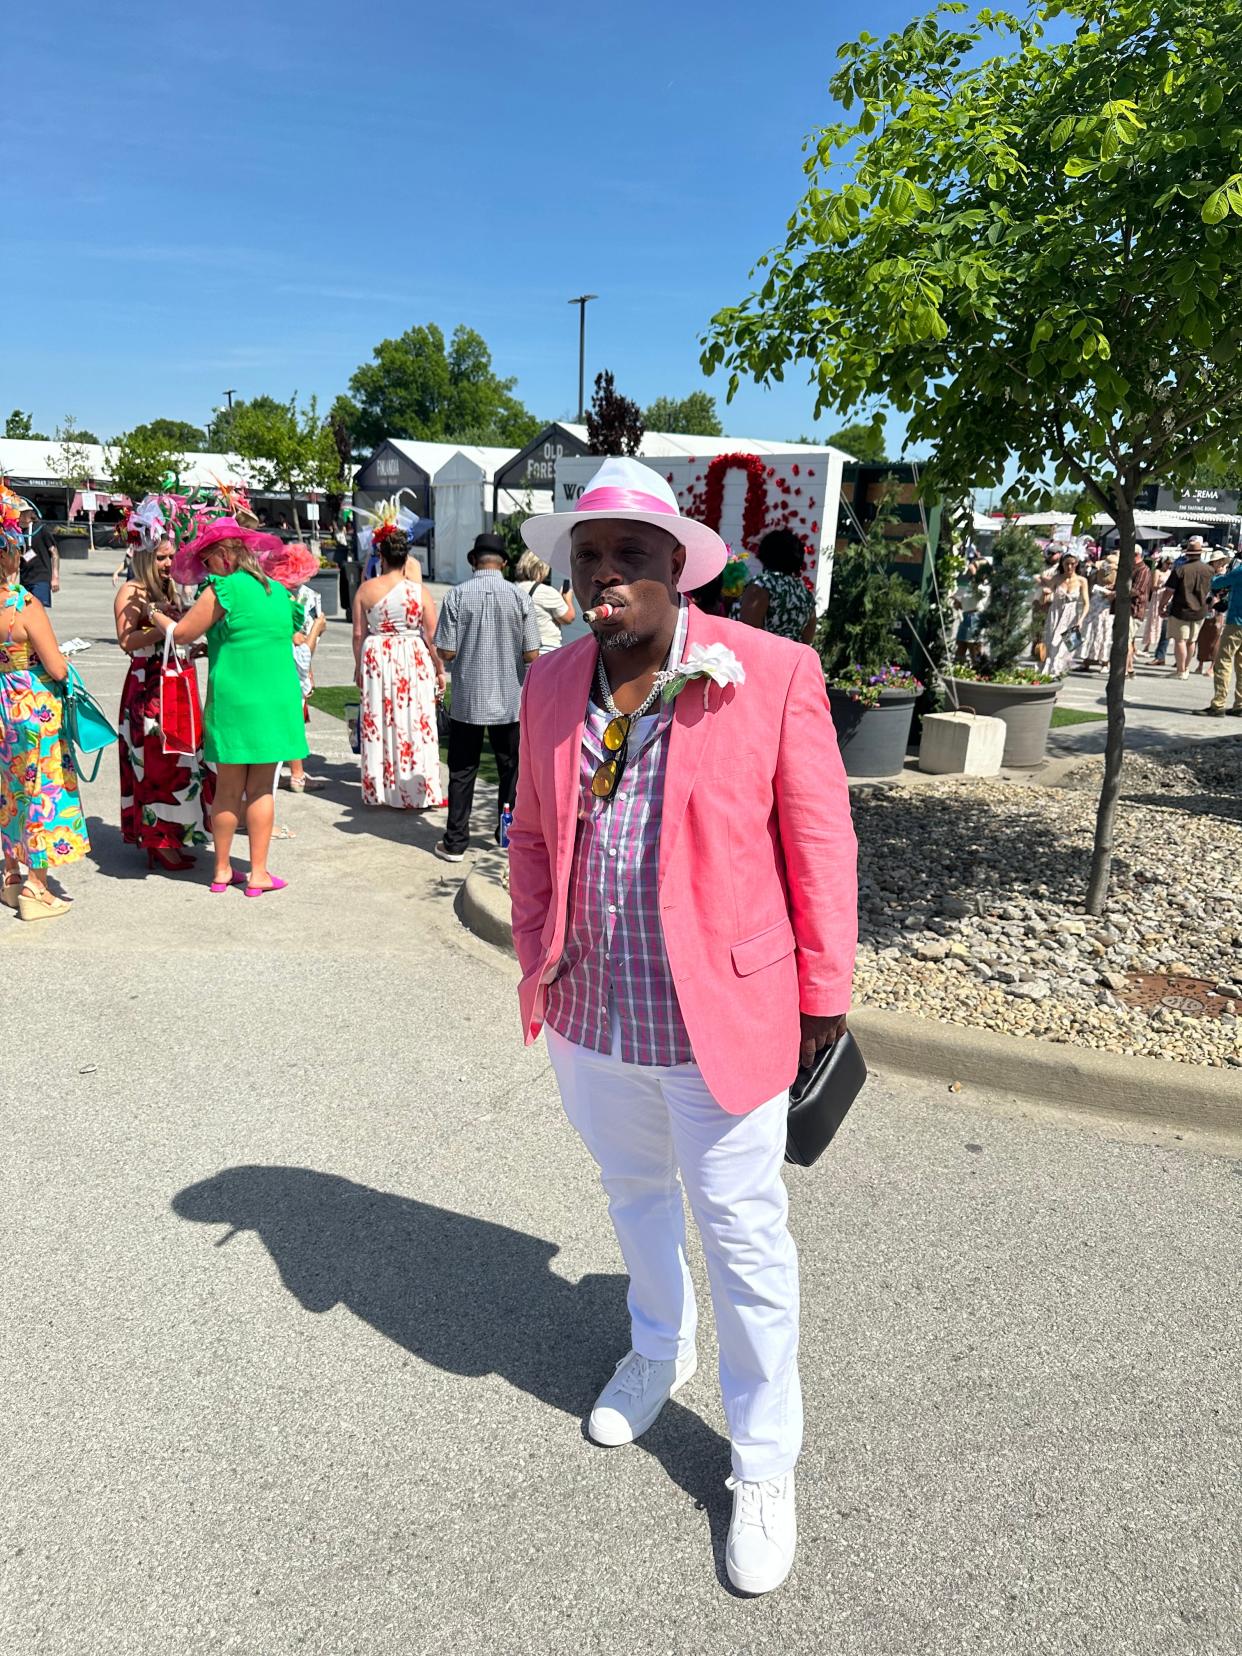 Jason Brownlee, a Louisville native, has attended the Kentucky Derby roughly 25 times. This year he is excited to attend Thurby too, noting the day still seems to lean towards locals.